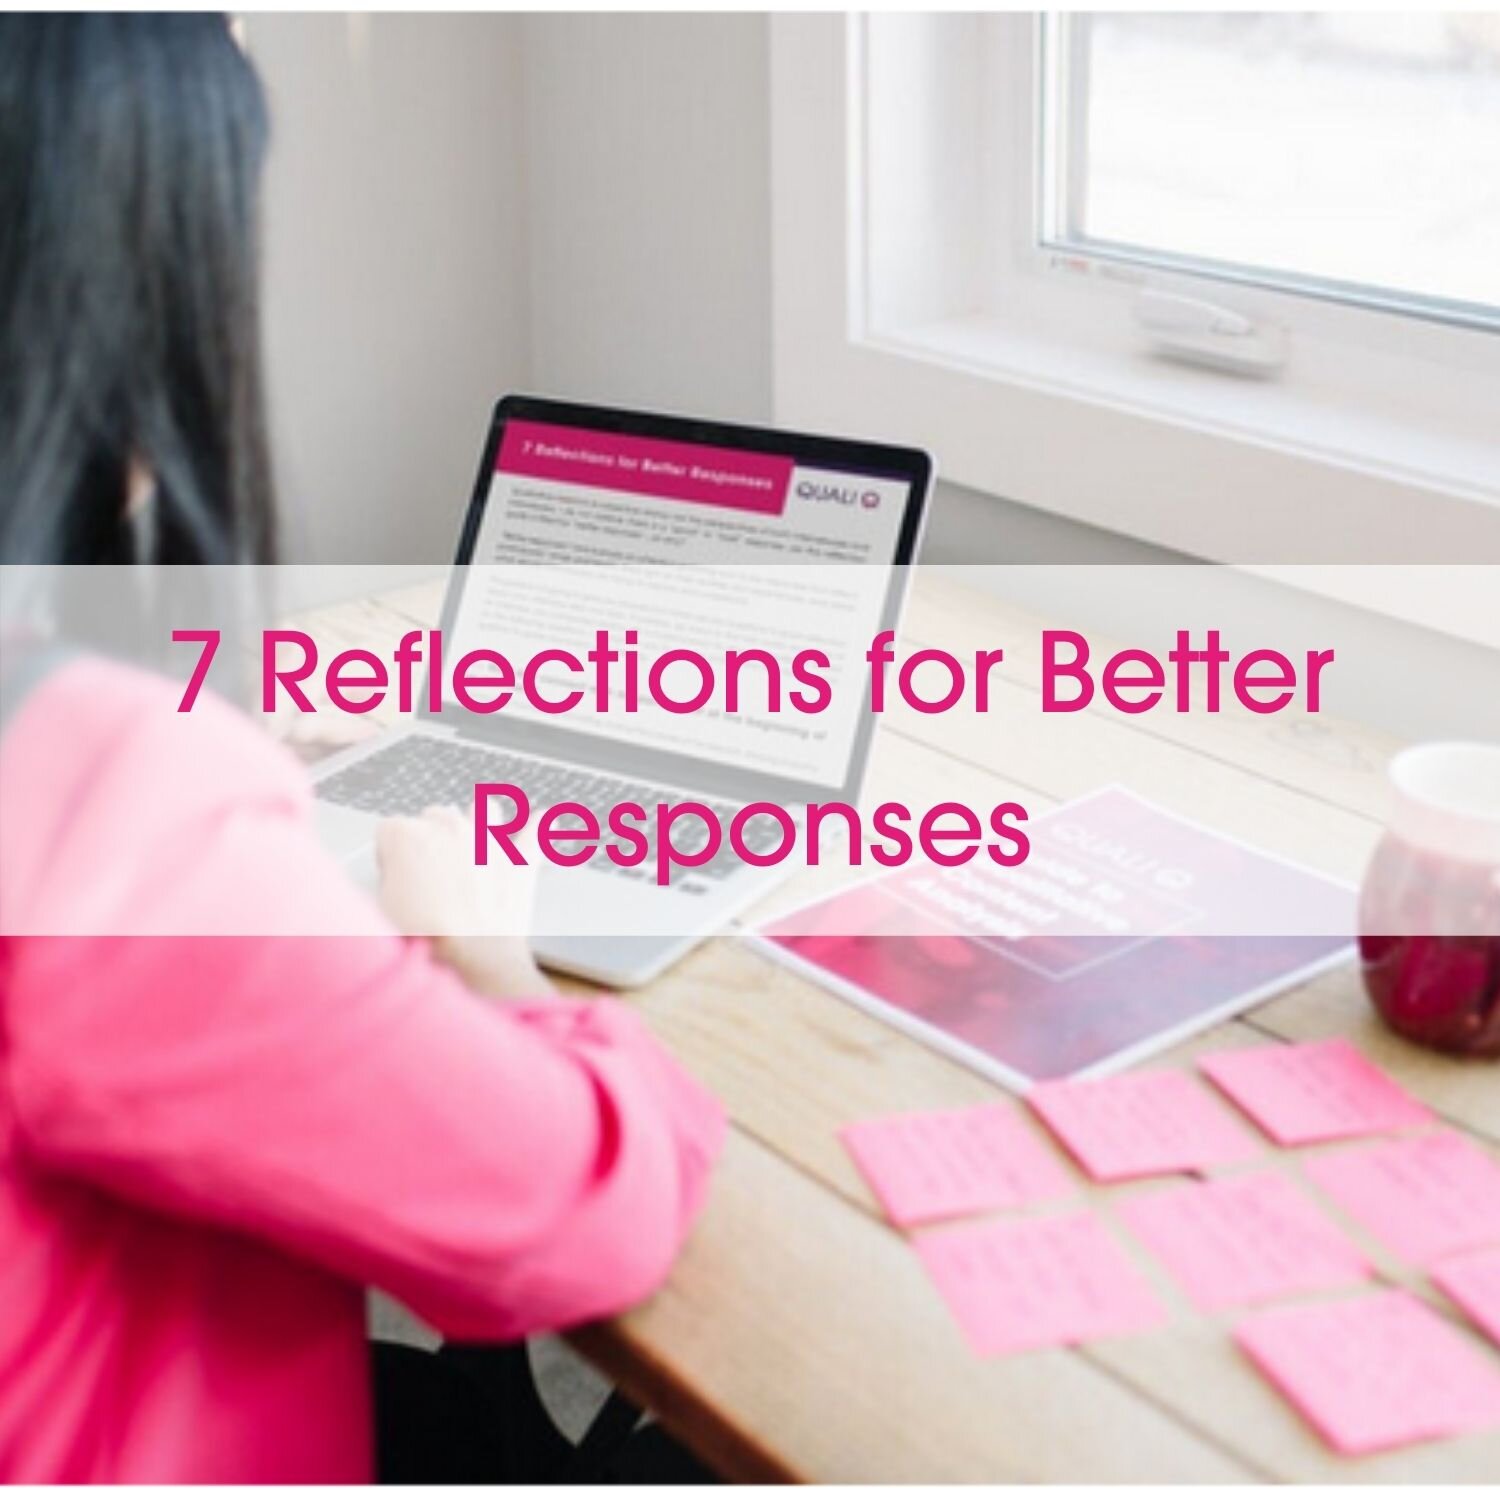   7 Reflections for Better Responses  is an insightful reflection tool we designed to help you assess and improve your qualitative interview skills. 